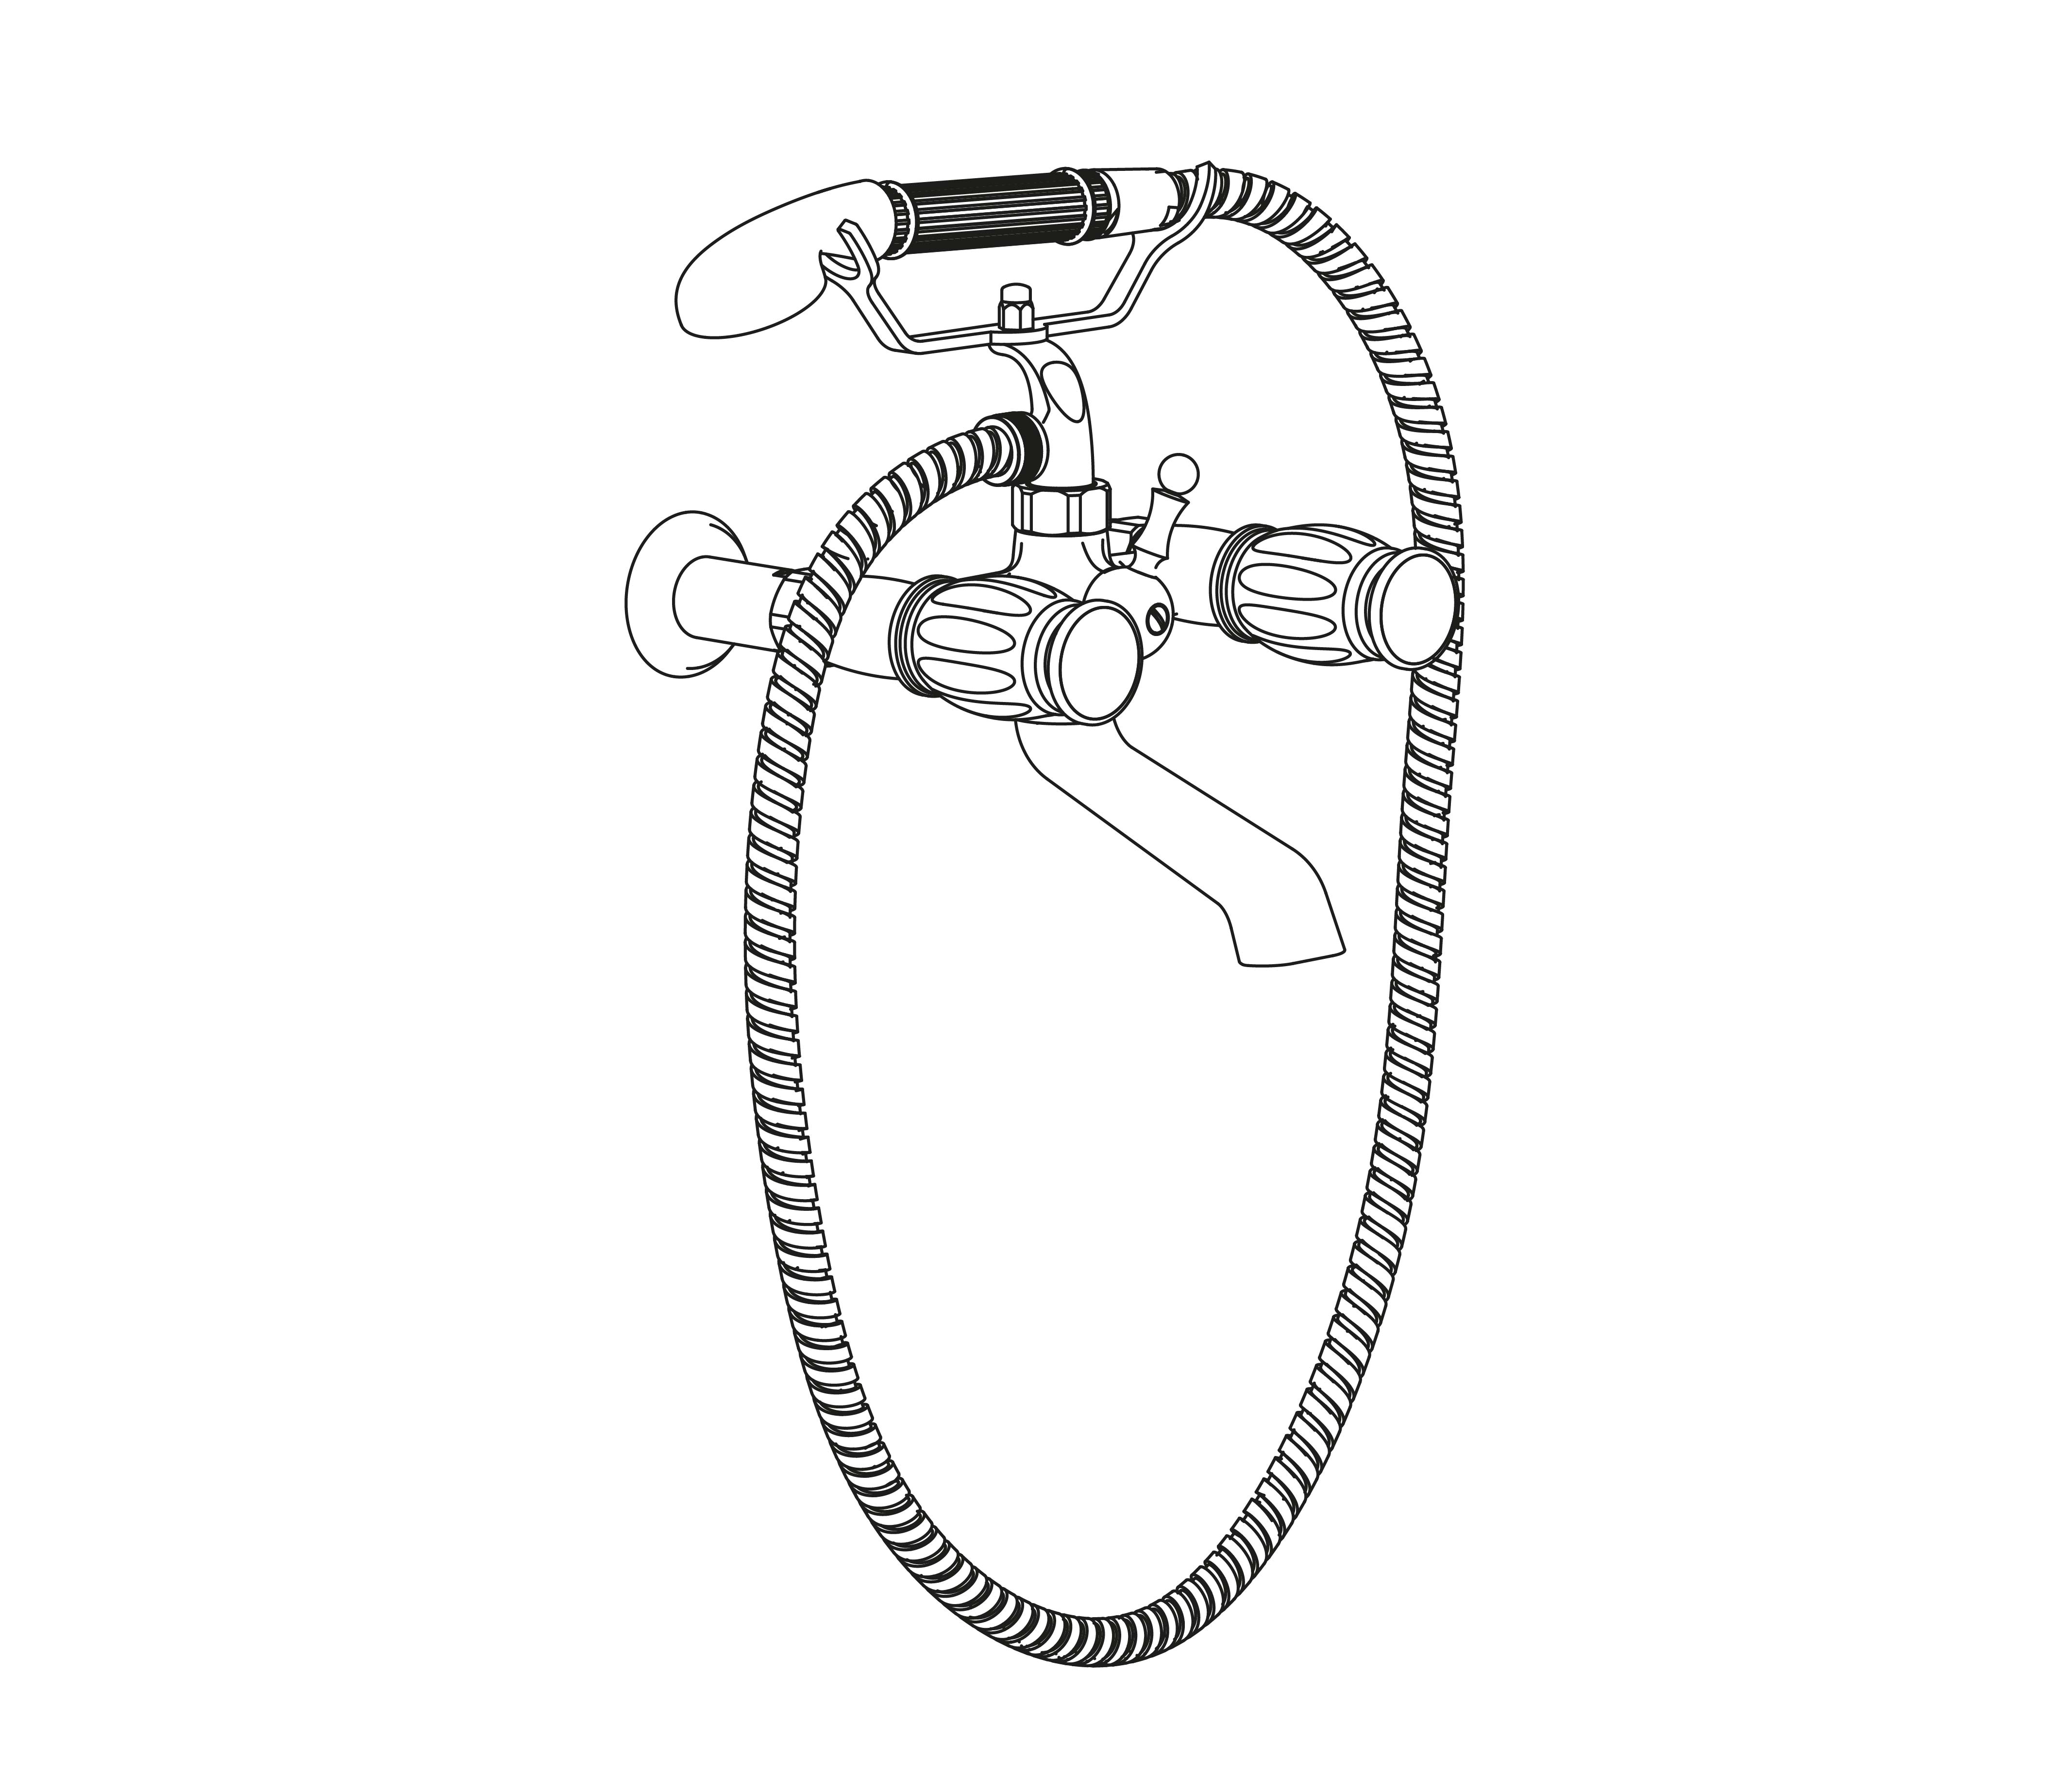 S198-3201 Wall mounted bath and shower mixer